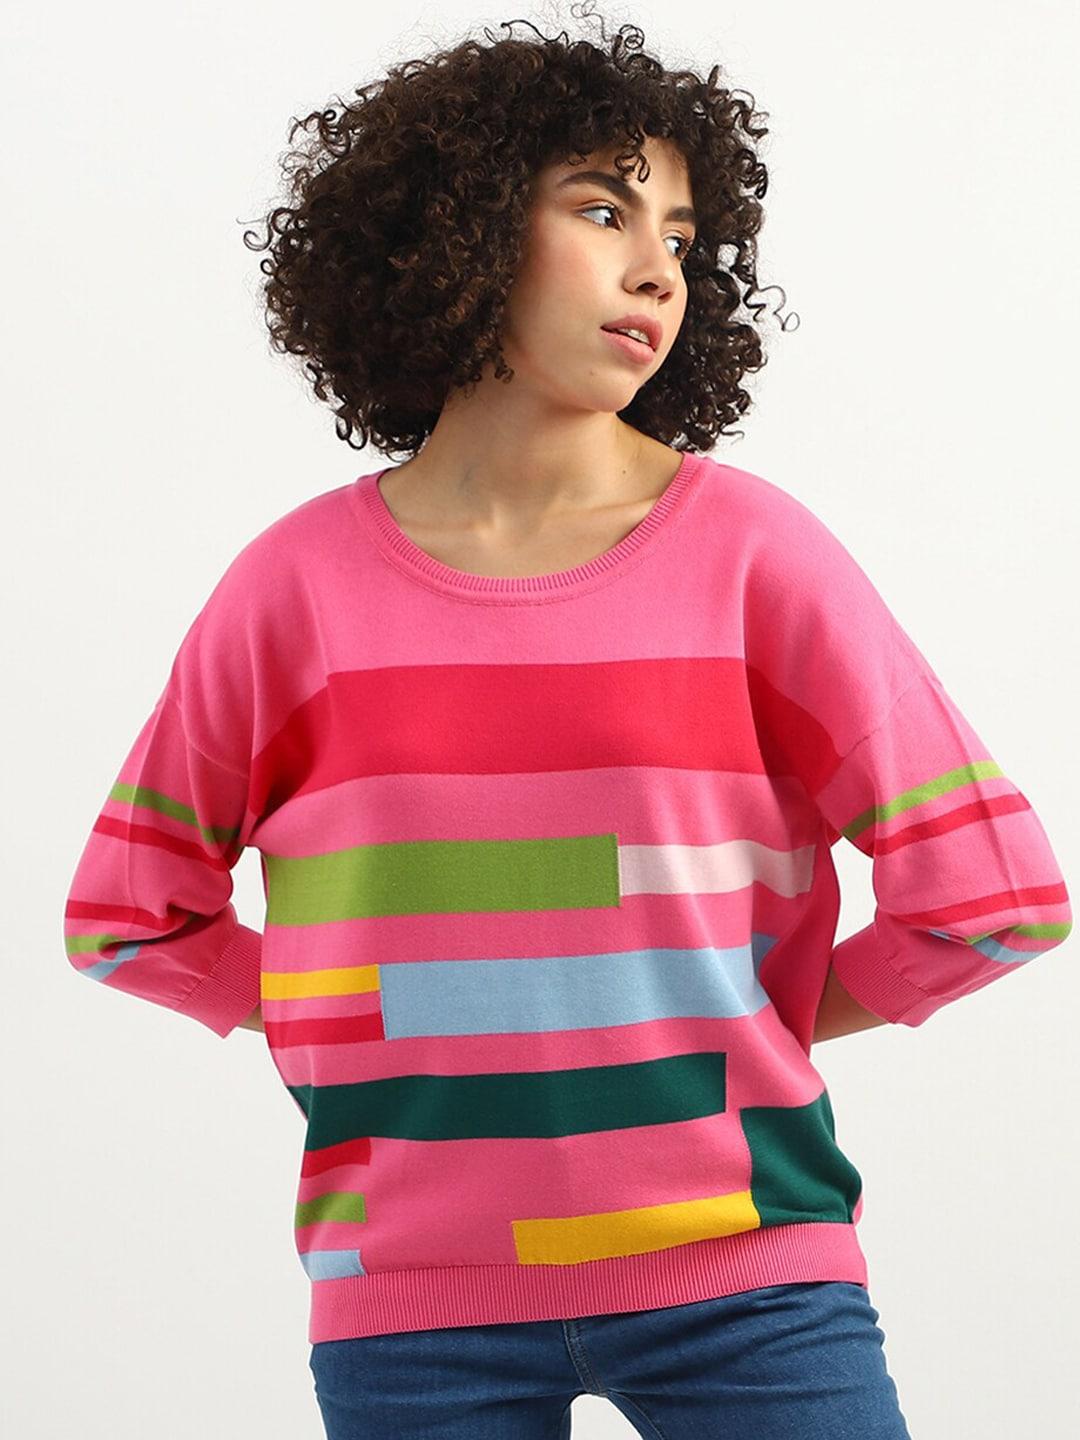 united-colors-of-benetton-womenround-neck-colourblocked-cotton-pullover-sweater